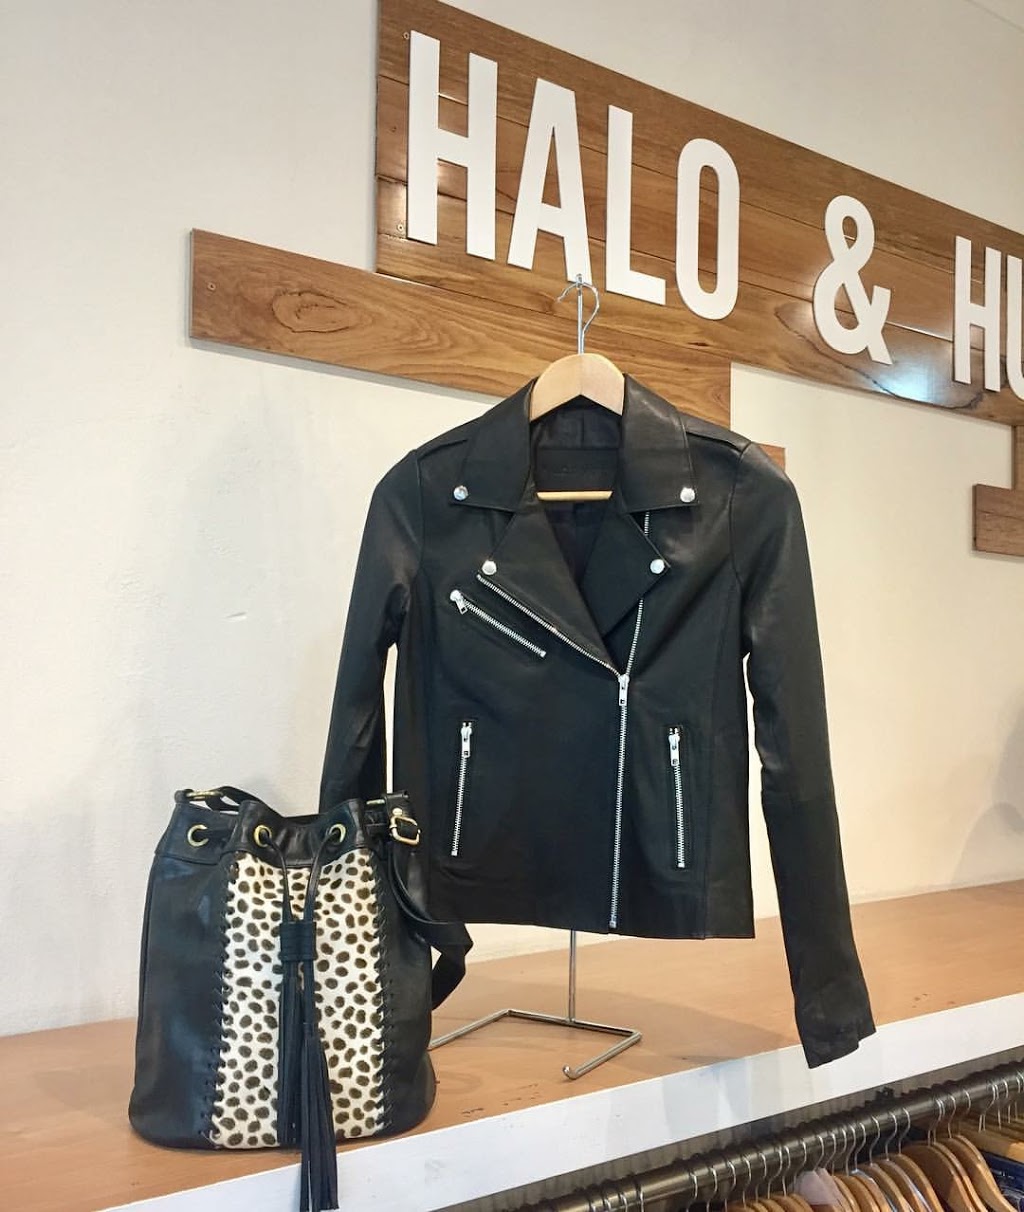 Halo & Hutch | clothing store | 435 Chapel St, South Yarra VIC 3141, Australia | 0398275376 OR +61 3 9827 5376